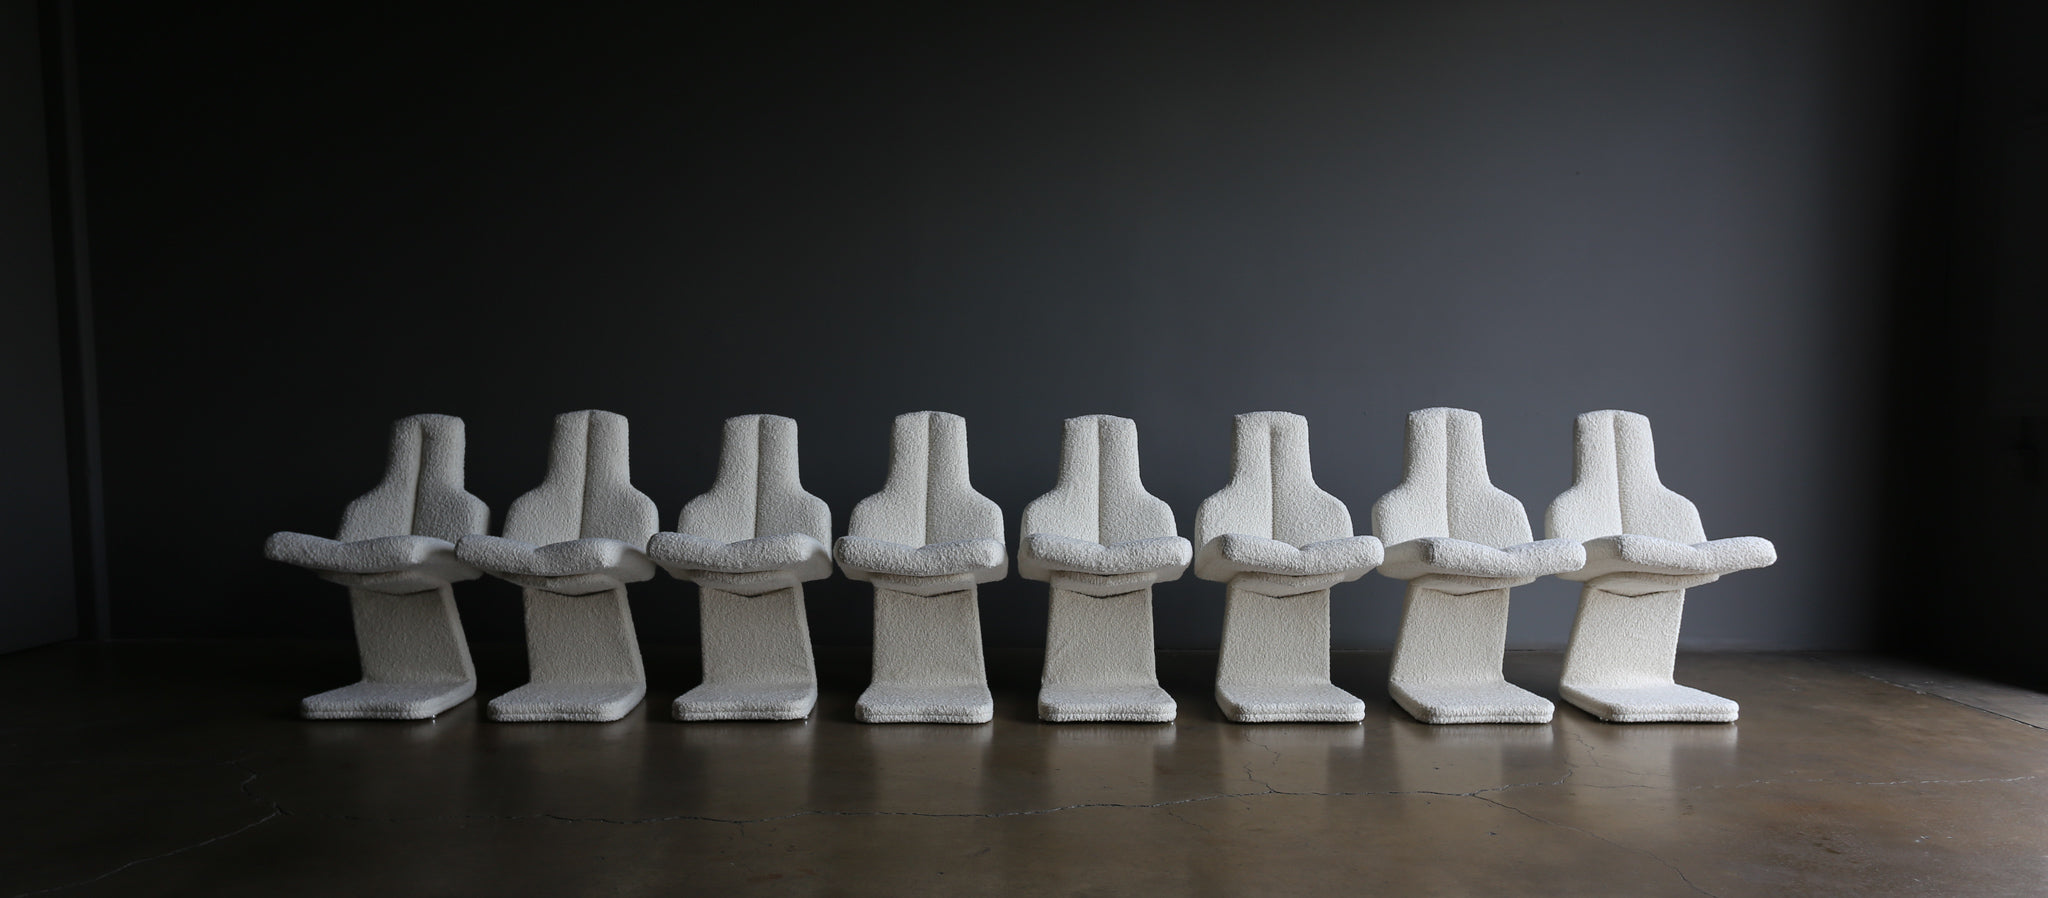 = SOLD = Gastone Rinaldi Set of Eight Dining Chairs for RIMA, Italy, c. 1975